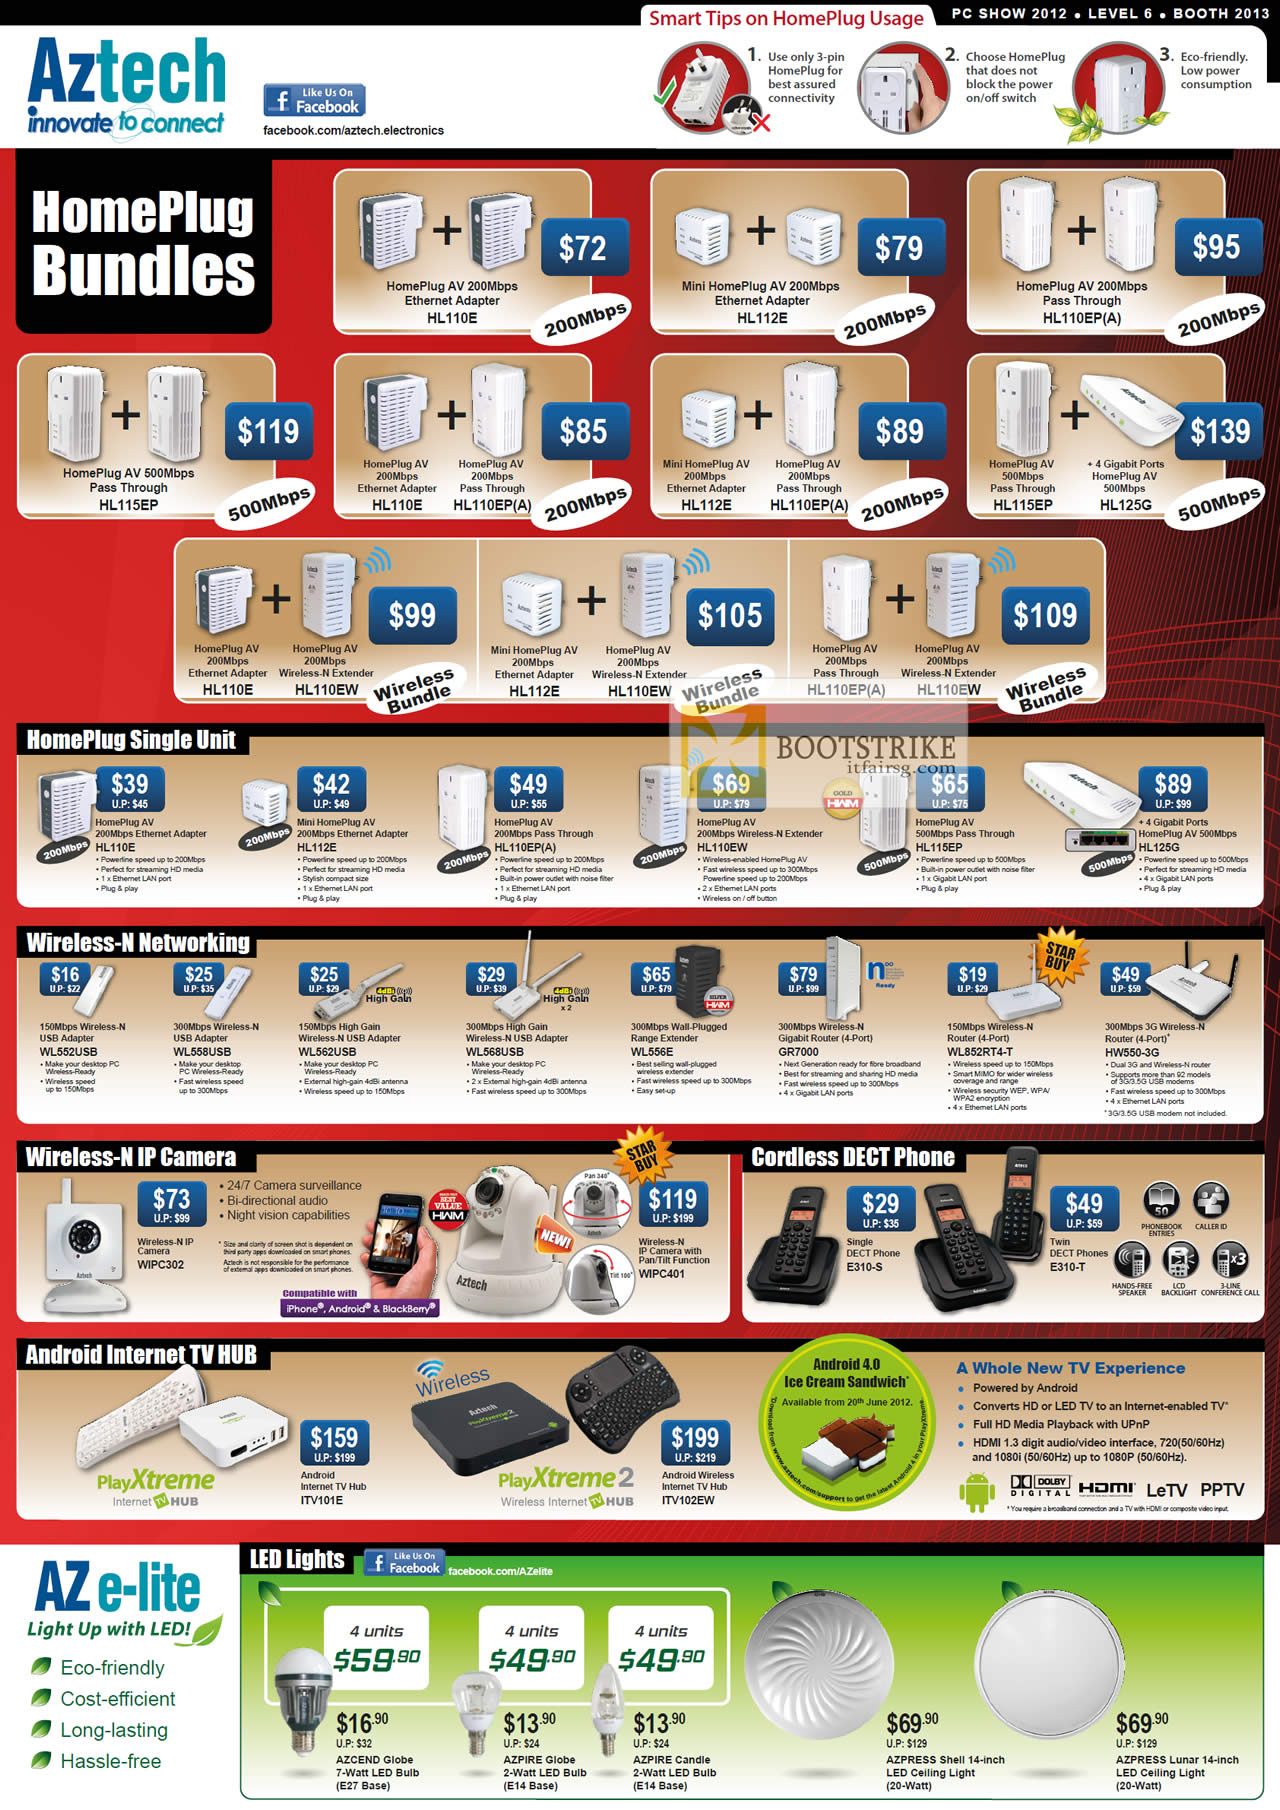 PC SHOW 2012 price list image brochure of Aztech Networking HomePlug Bundles, HomePlugs, Wireless N Router, USB Adapter, IPCam, DECT Phone, Android Internet TV Hub, LED Lights Bulbs